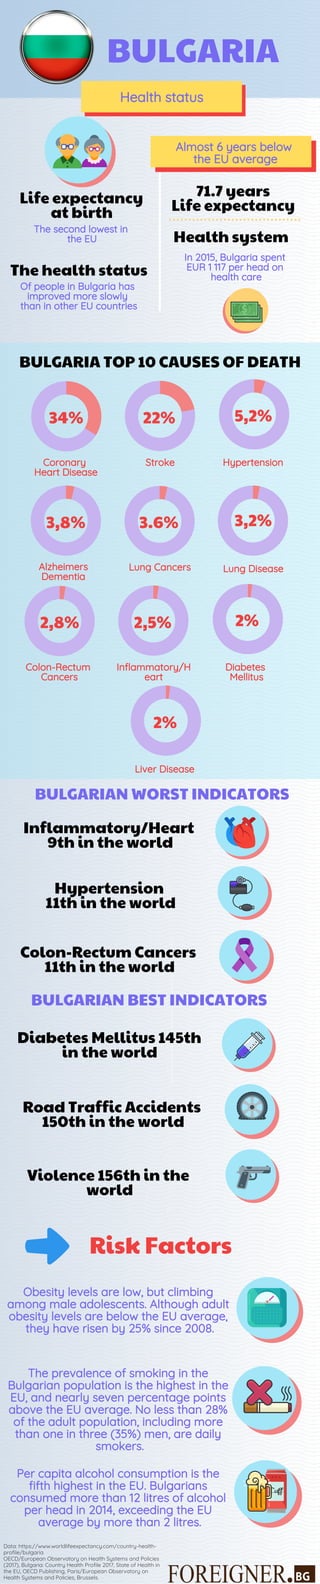 Health status
0ife e pectanc
at birth
5he second lo est in
the EU
. ears
0ife e pectanc
Health s stem
In , Bulgaria spent
EUR per head on
health care
Of people in Bulgaria has
impro ed more slo l
than in other EU countries
The health status
Coronar
Heart Disease
Stroke H pertension
% % , %
BU0GARyA TOP CAUSES OF DEATH
H pertension
th in the world
Risk Factors
Obesit le els are lo , but climbing
among male adolescents. Although adult
obesit le els are belo the EU a erage,
the ha e risen b % since .
BU0GARyA
Almost ears belo
the EU a erage
Alzheimers
Dementia
Lung Cancers Lung Disease
, % . % , %
Colon-Rectum
Cancers
Inflammator /H
eart
Diabetes
Mellitus
, % , % %
Li er Disease
%
Colon-Rectum Cancers
th in the world
ynflammator /Heart
th in the world
BU0GARyA9 BEST y9DyCATORS
Diabetes 8ellitus th
in the world
Violence th in the
world
Road Traffic Accidents
th in the world
5he pre alence of smoking in the
Bulgarian population is the highest in the
EU, and nearl se en percentage points
abo e the EU a erage. No less than %
of the adult population, including more
than one in three % men, are dail
smokers.
Per capita alcohol consumption is the
fifth highest in the EU. Bulgarians
consumed more than litres of alcohol
per head in , e ceeding the EU
a erage b more than litres.
BU0GARyA9 WORST y9DyCATORS
Data: https:// . orldlifee pectanc .com/countr -health-
profile/bulgaria
OECD/European Obser ator on Health S stems and Policies
, Bulgaria: Countr Health Profile , State of Health in
the EU, OECD Publishing, Paris/European Obser ator on
Health S stems and Policies, Brussels.
 